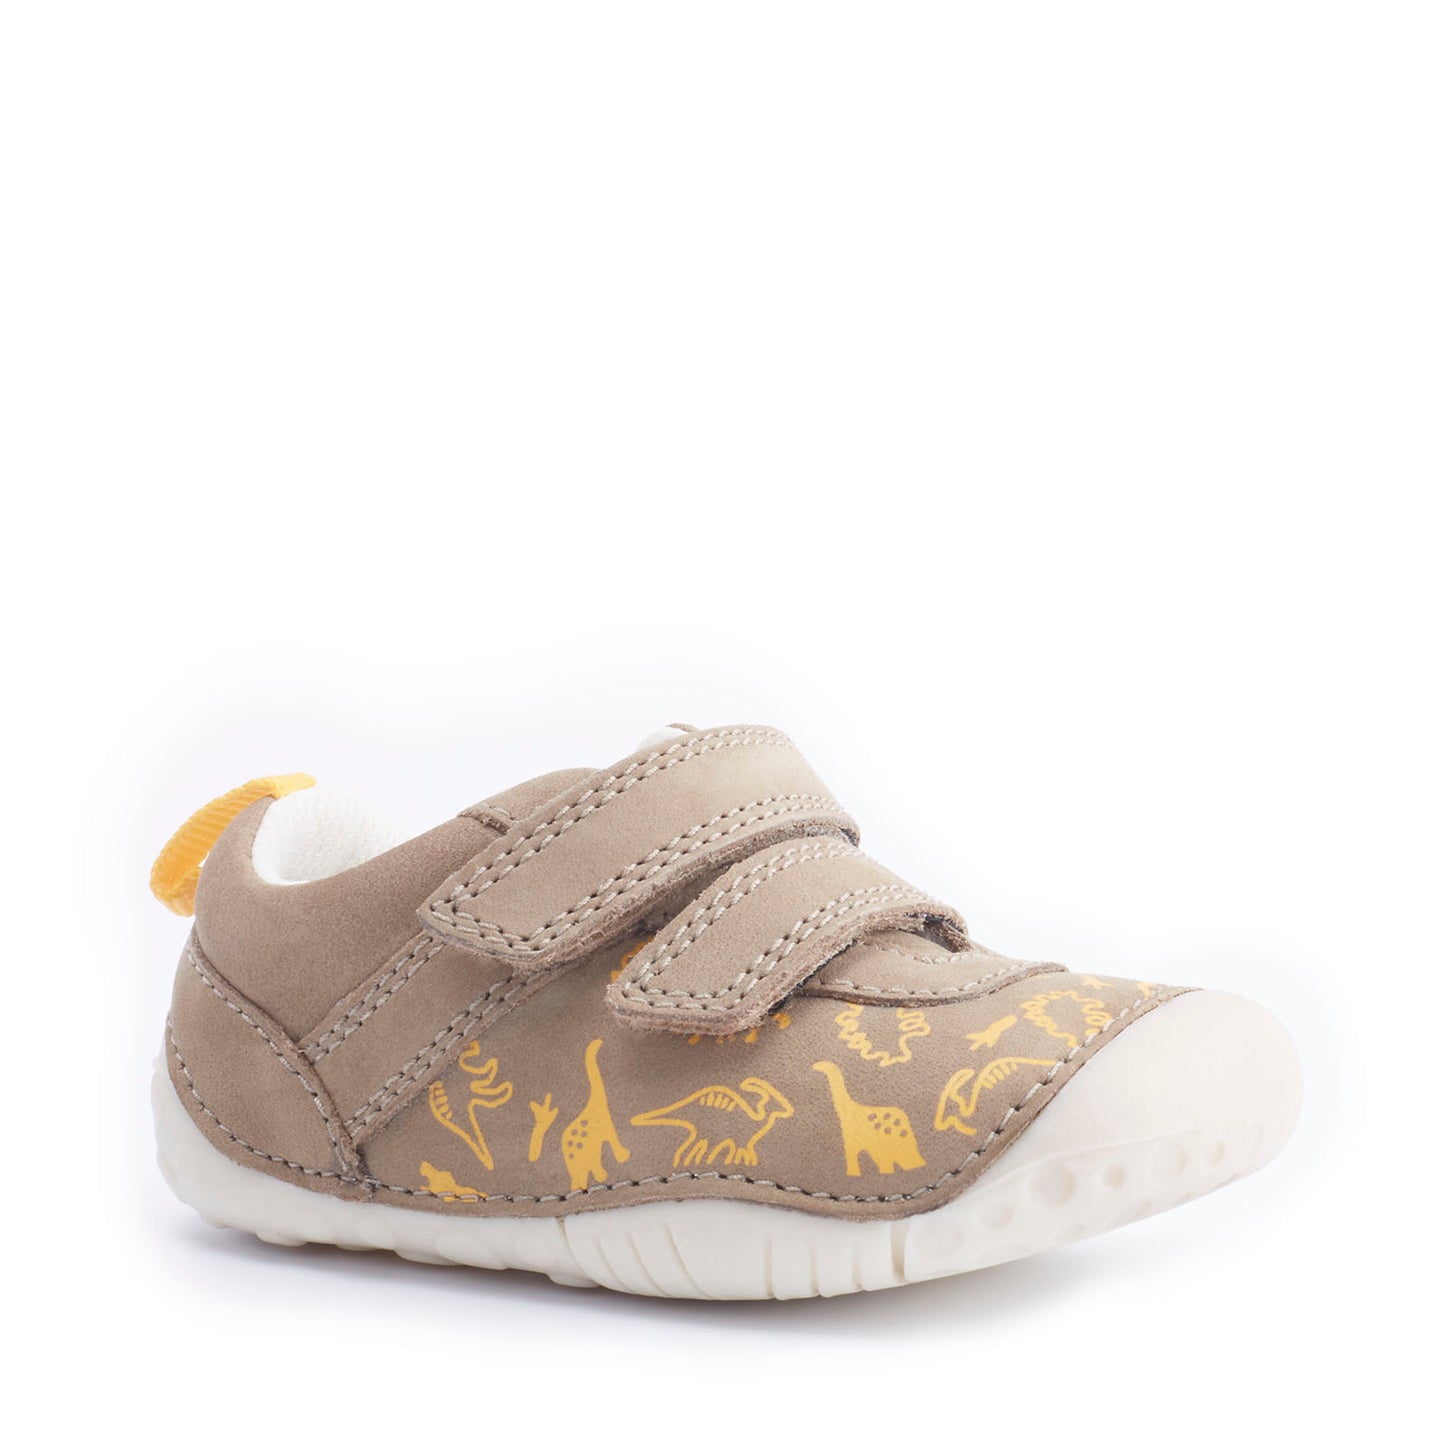 A boys pre walker by Start Rite, style Roar, in beige and yellow nubuck with double velcro fastening. Angled view.